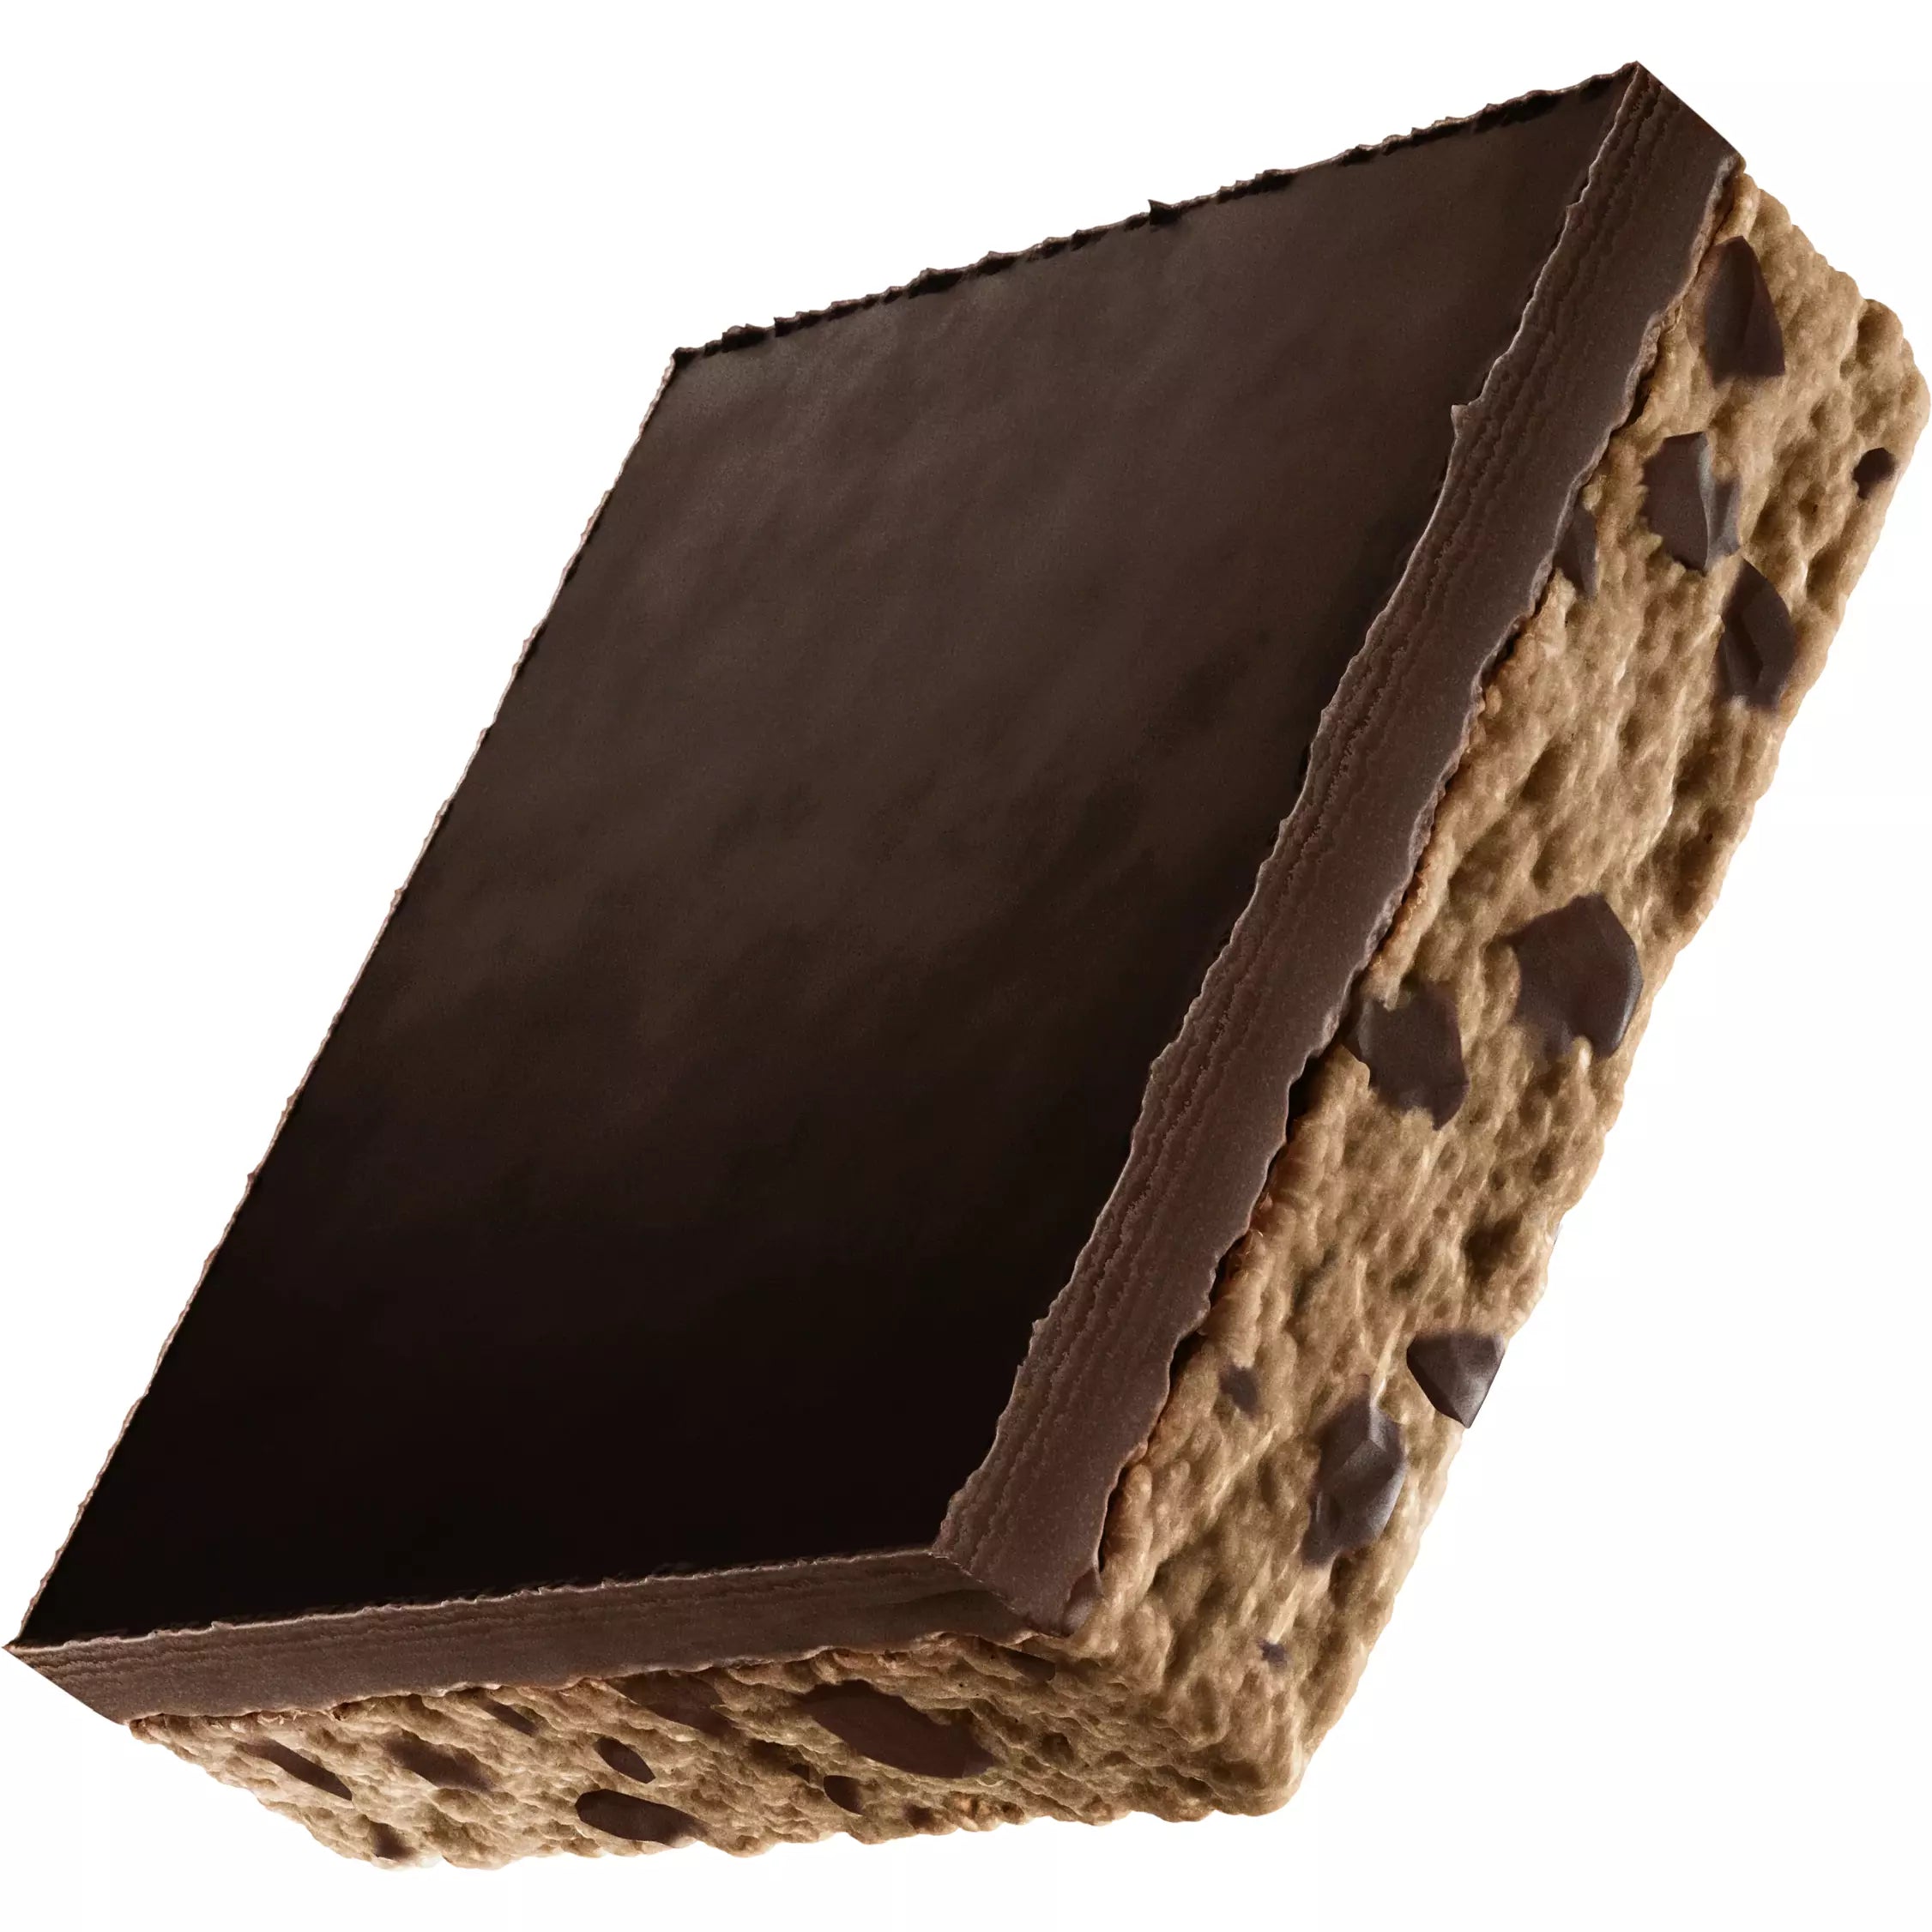 Mid-Day Squares NEW FORMAT (1 square) Protein Snacks Almond Crunch,Brownie Batter,Peanut Butta,Cookie Dough Mid-Day Squares mid-day-squares-new-format-1-square